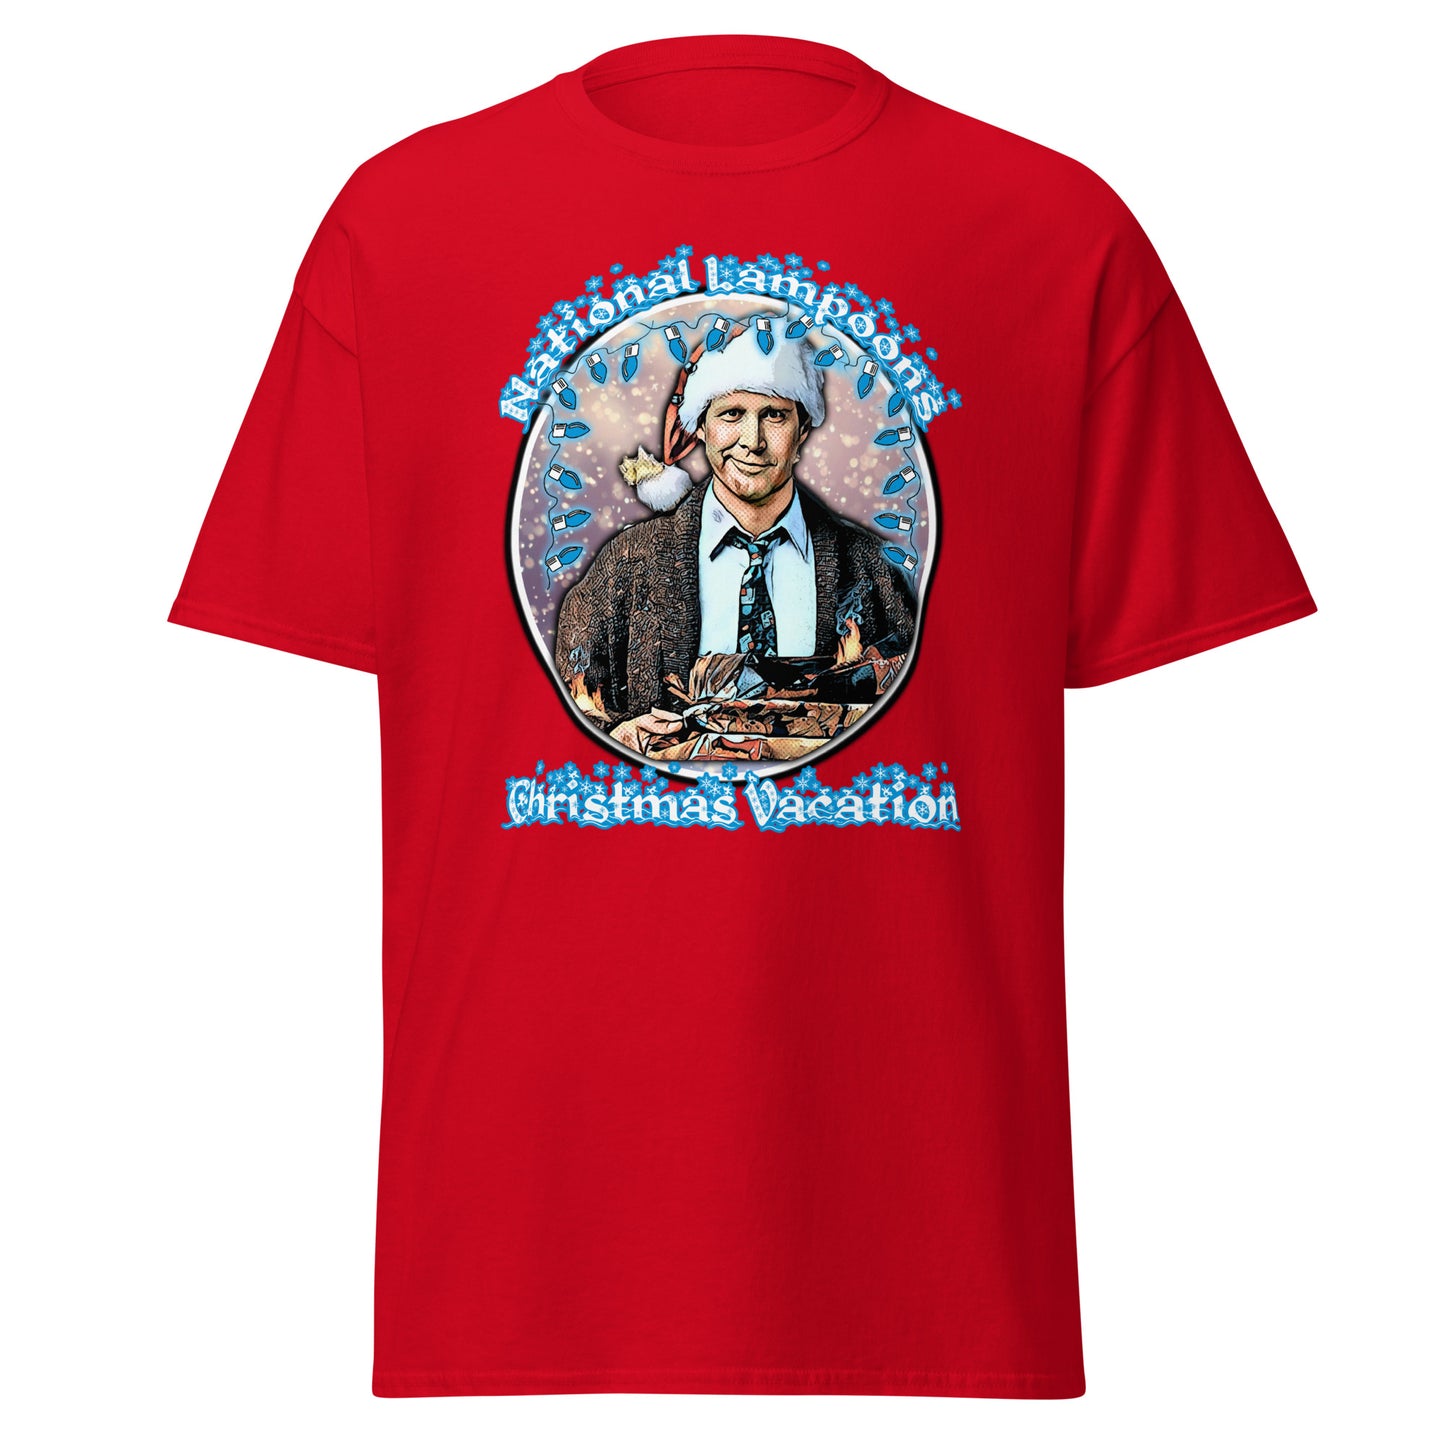 Christmas Vacation T-Shirt - Embrace the Griswold Family Fun